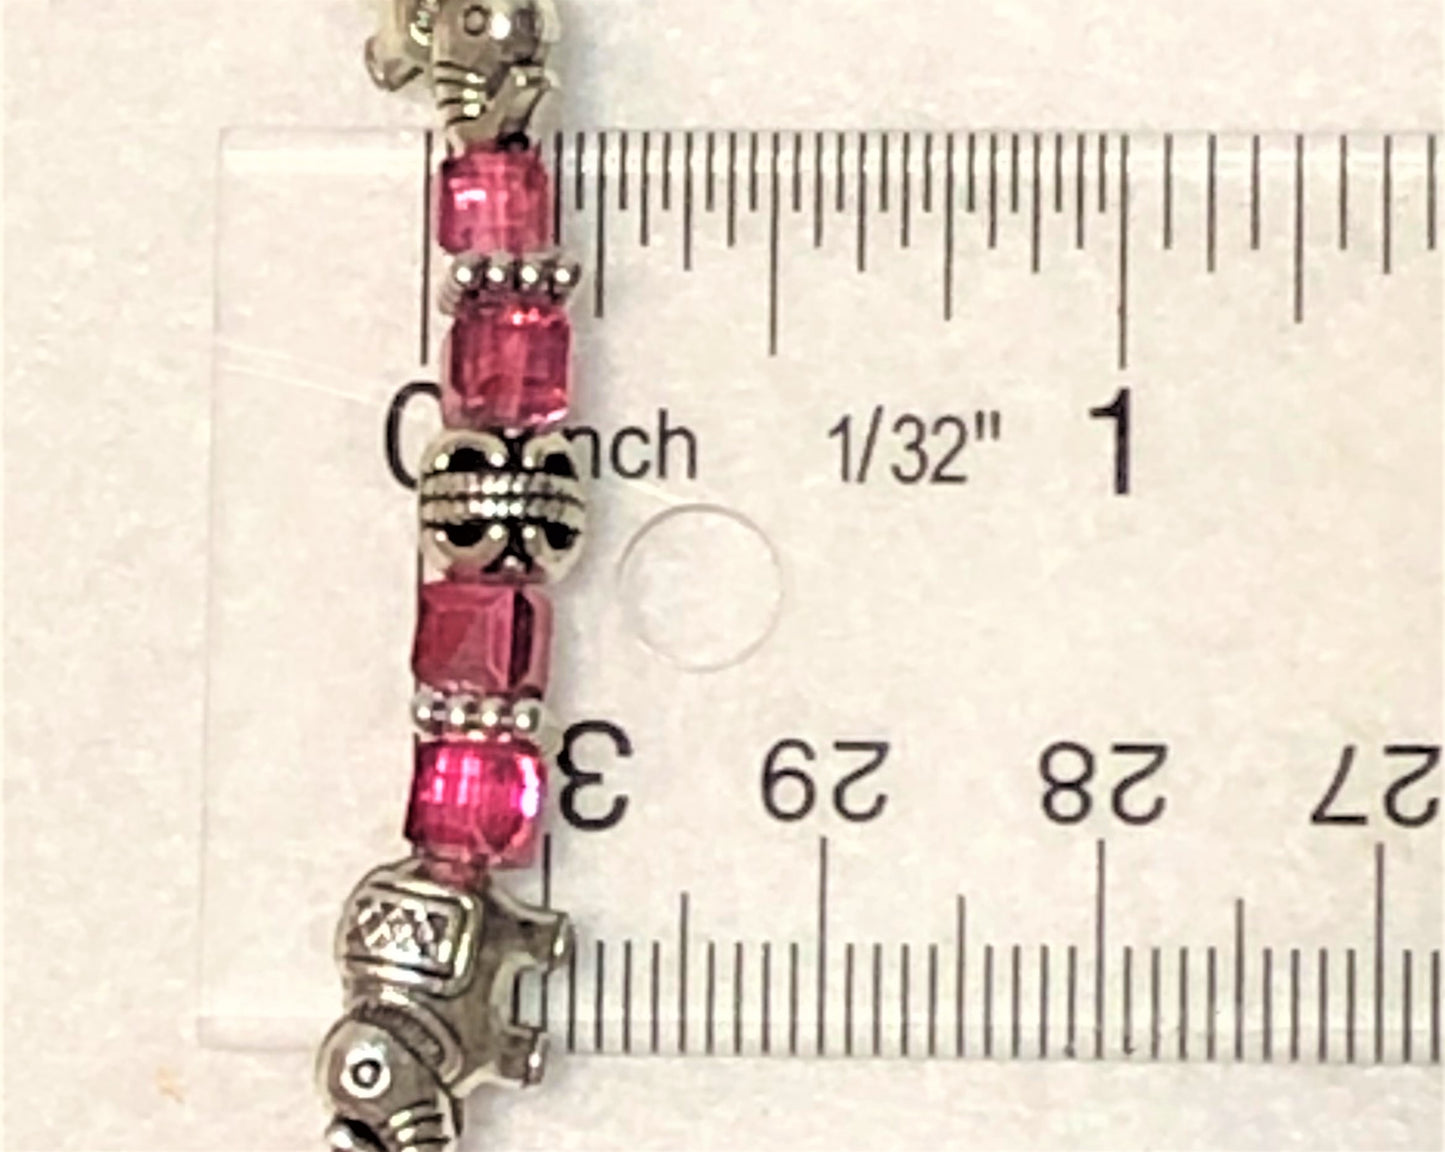 Elephant Stretch Bracelet - Crystal Bead Bracelet 13 COLORS - Pink Metalic, Good Luck Strength and Wisdom Symbol - Cheer and Dance On Demand